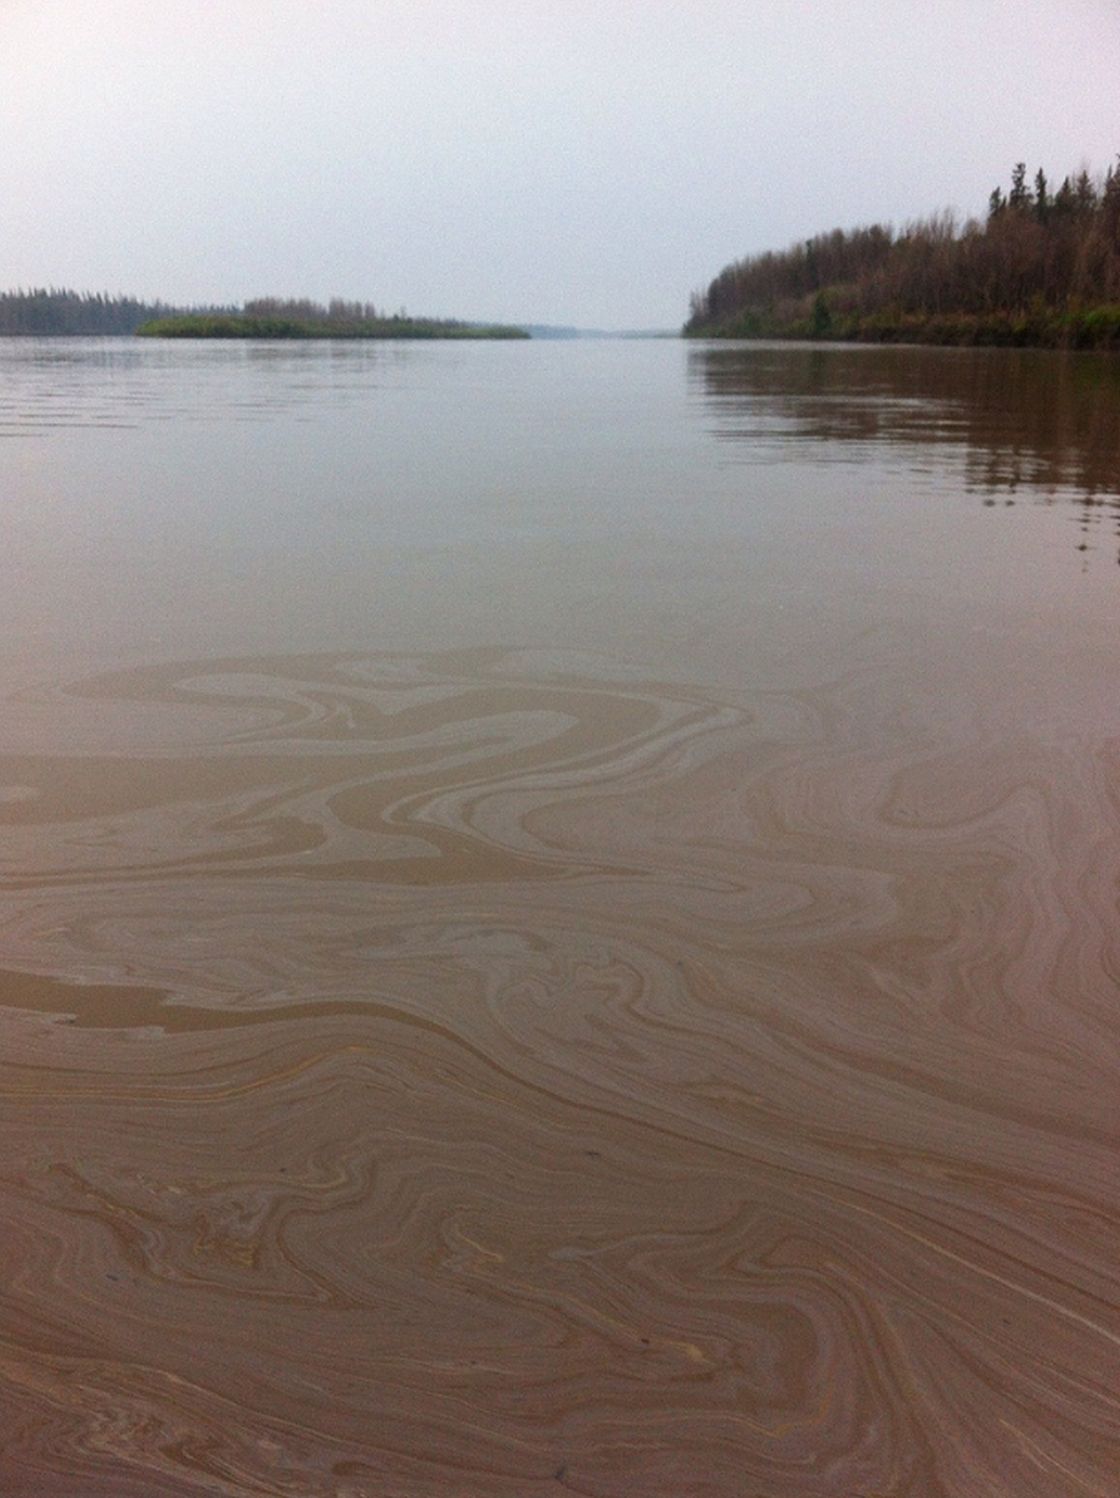 Saturday July, 6, members of the Athabasca Chipewyan First Nation reported a large oily sheen on the river, about 60 kilometres north of Fort McMurray.